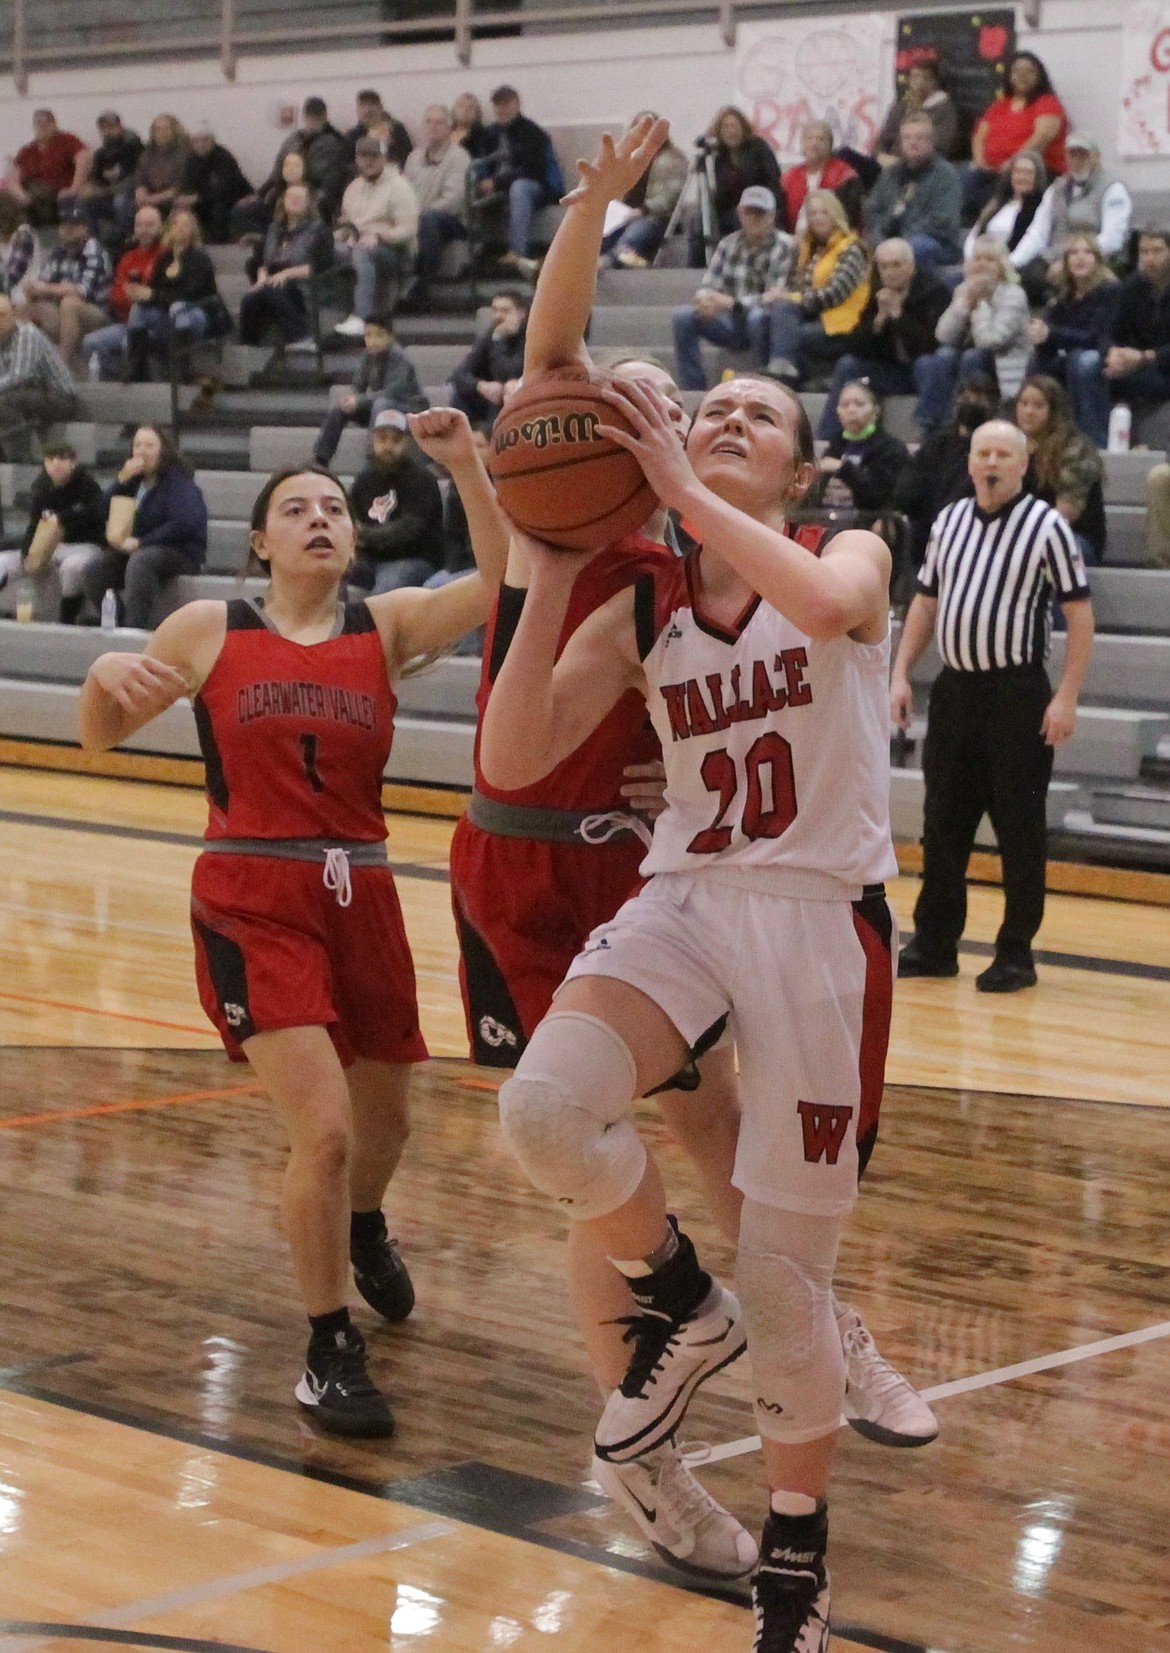 MARK NELKE/Press
Jaden House (20) of Wallace drives the basket against Clearwater Valley in the first half of a state 1A Division I girls basketball play-in game Saturday at Post Falls High.